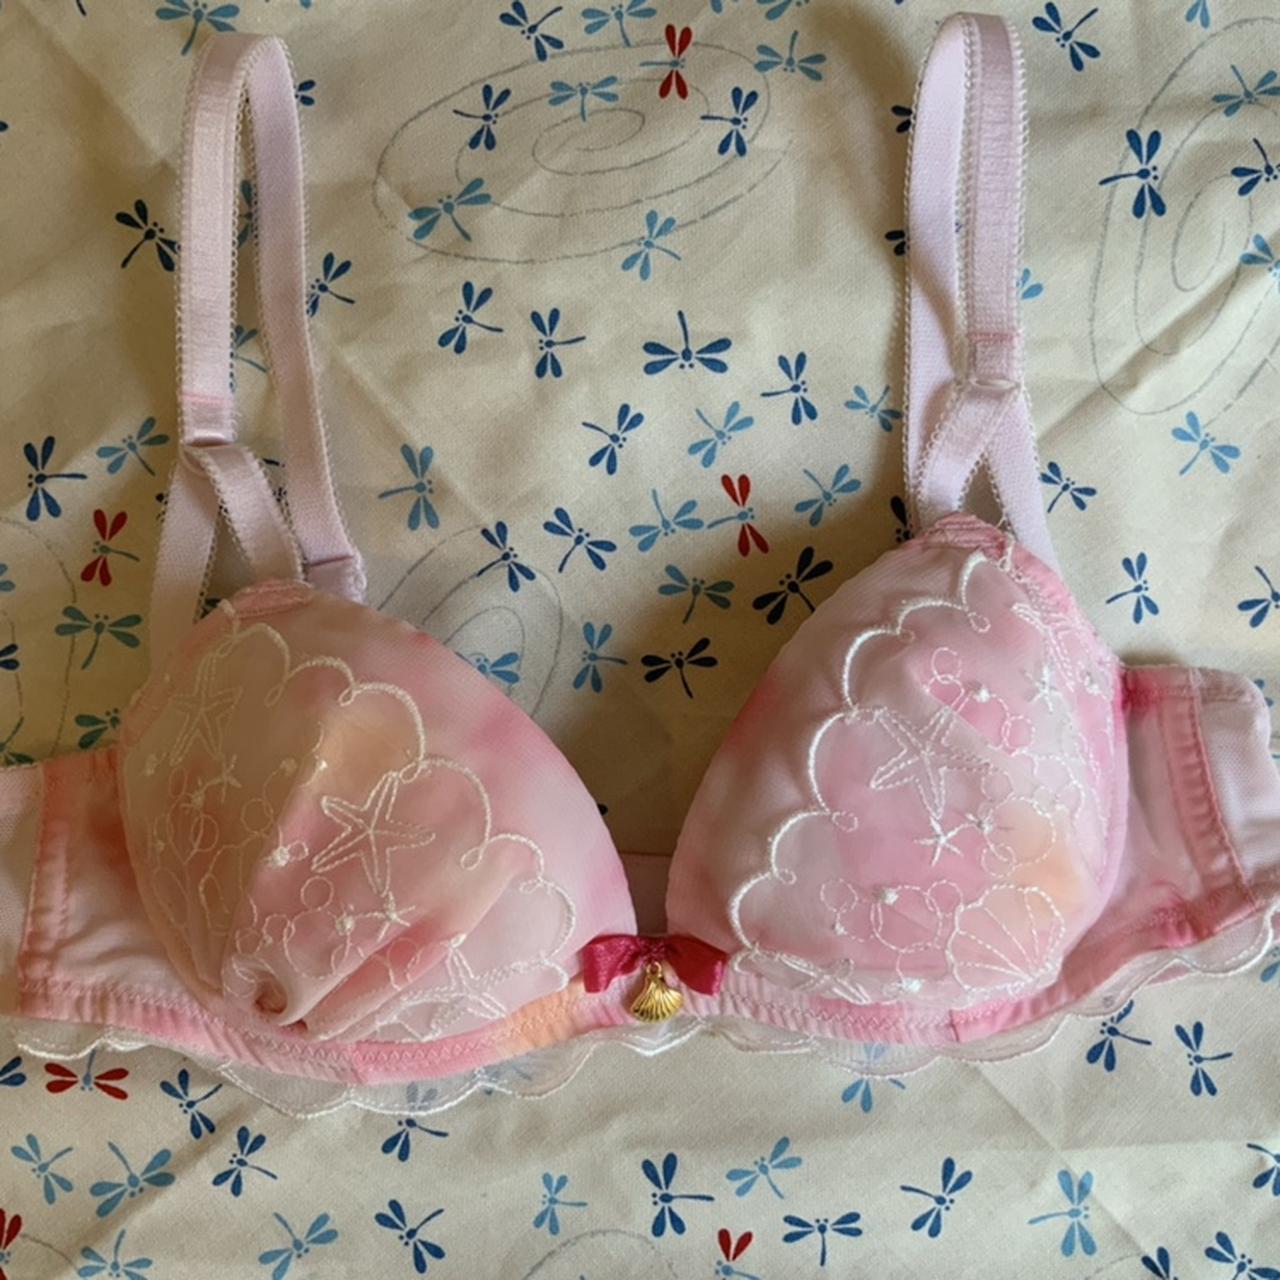 ❣️❣️BRA SIZE IN JAPANESE❣️❣️ A70 = 32A !! Band size is